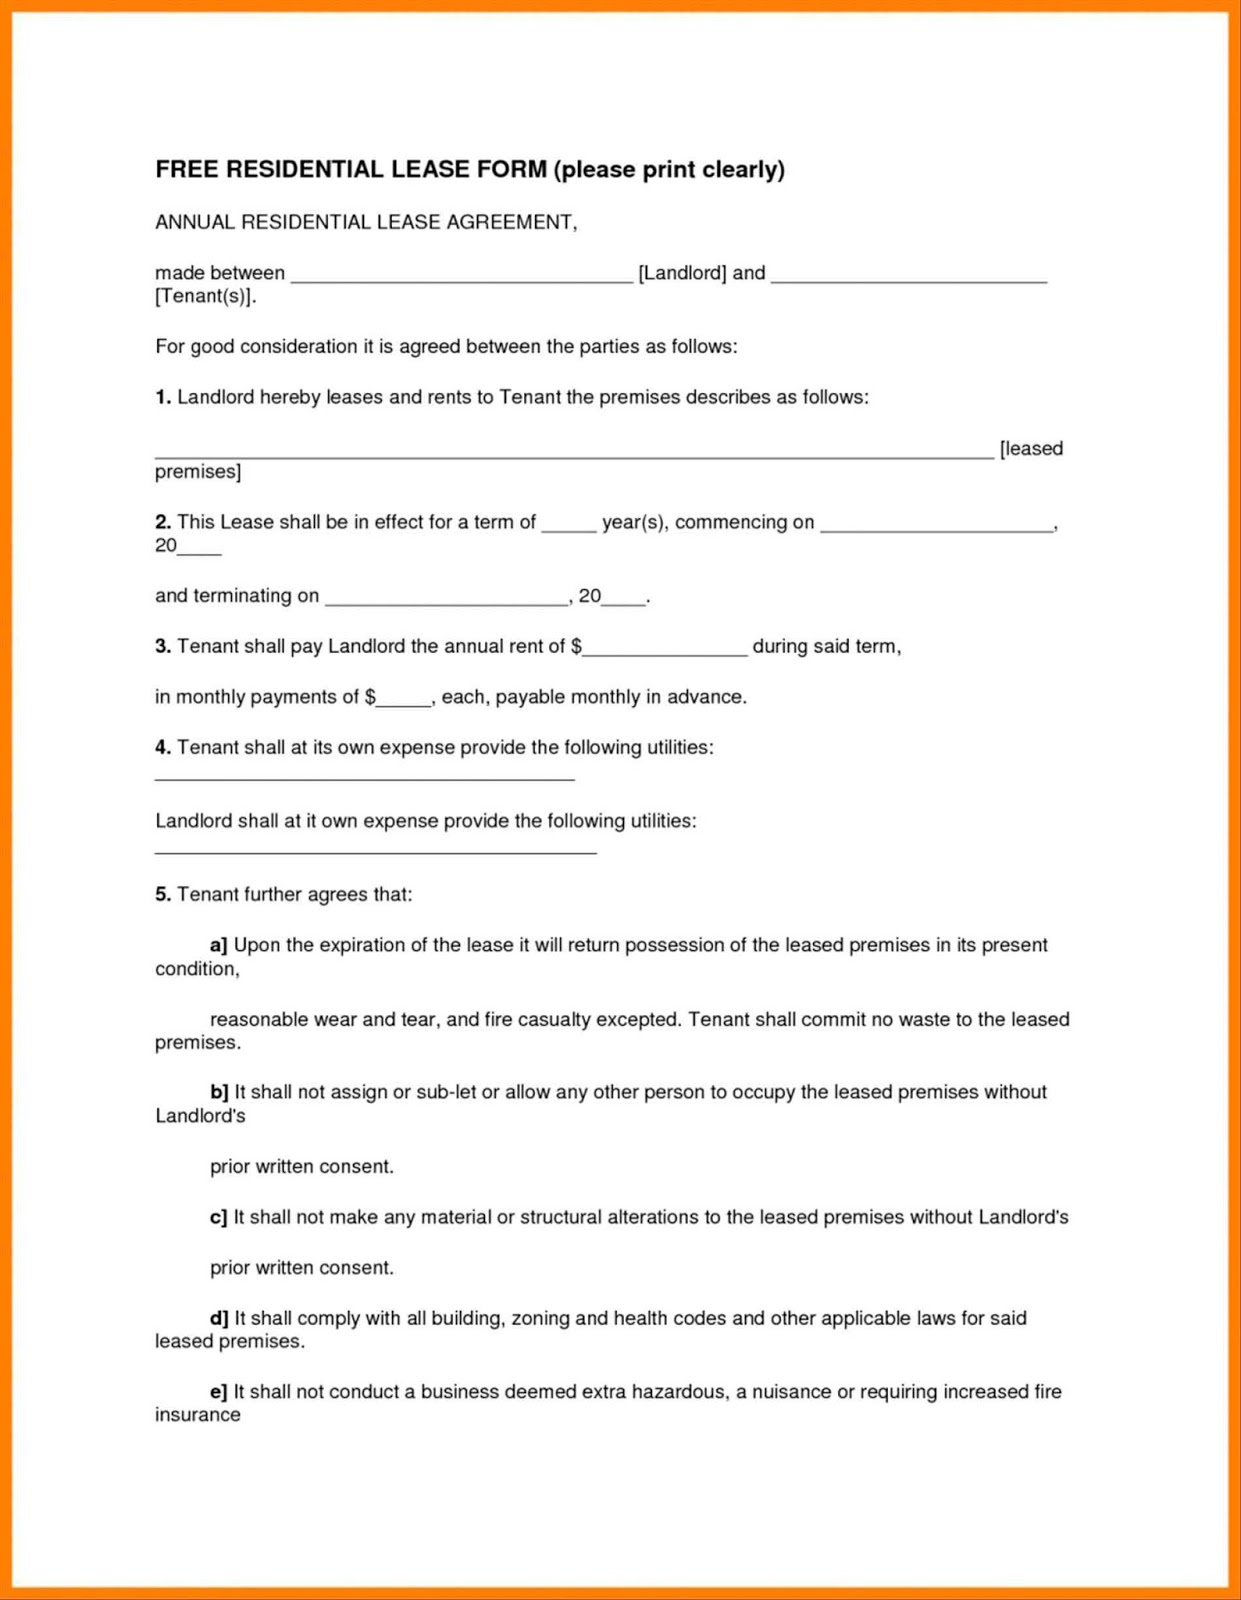 tenancy-agreement-template-for-renting-a-room-doctemplates